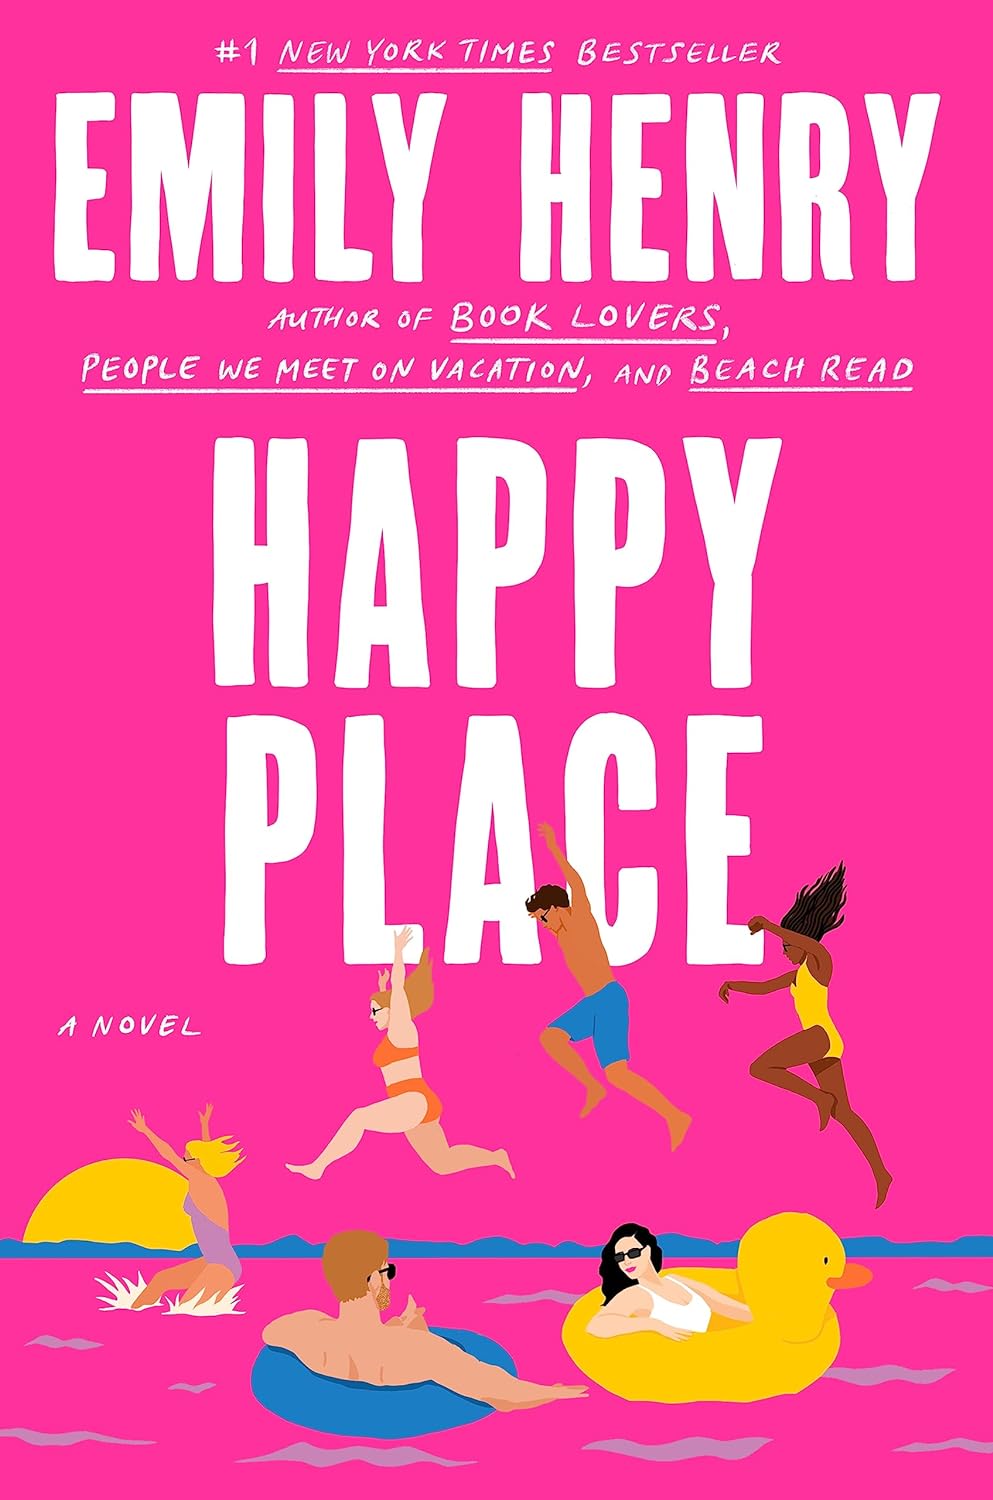 Image for "Happy Place: A Novel"